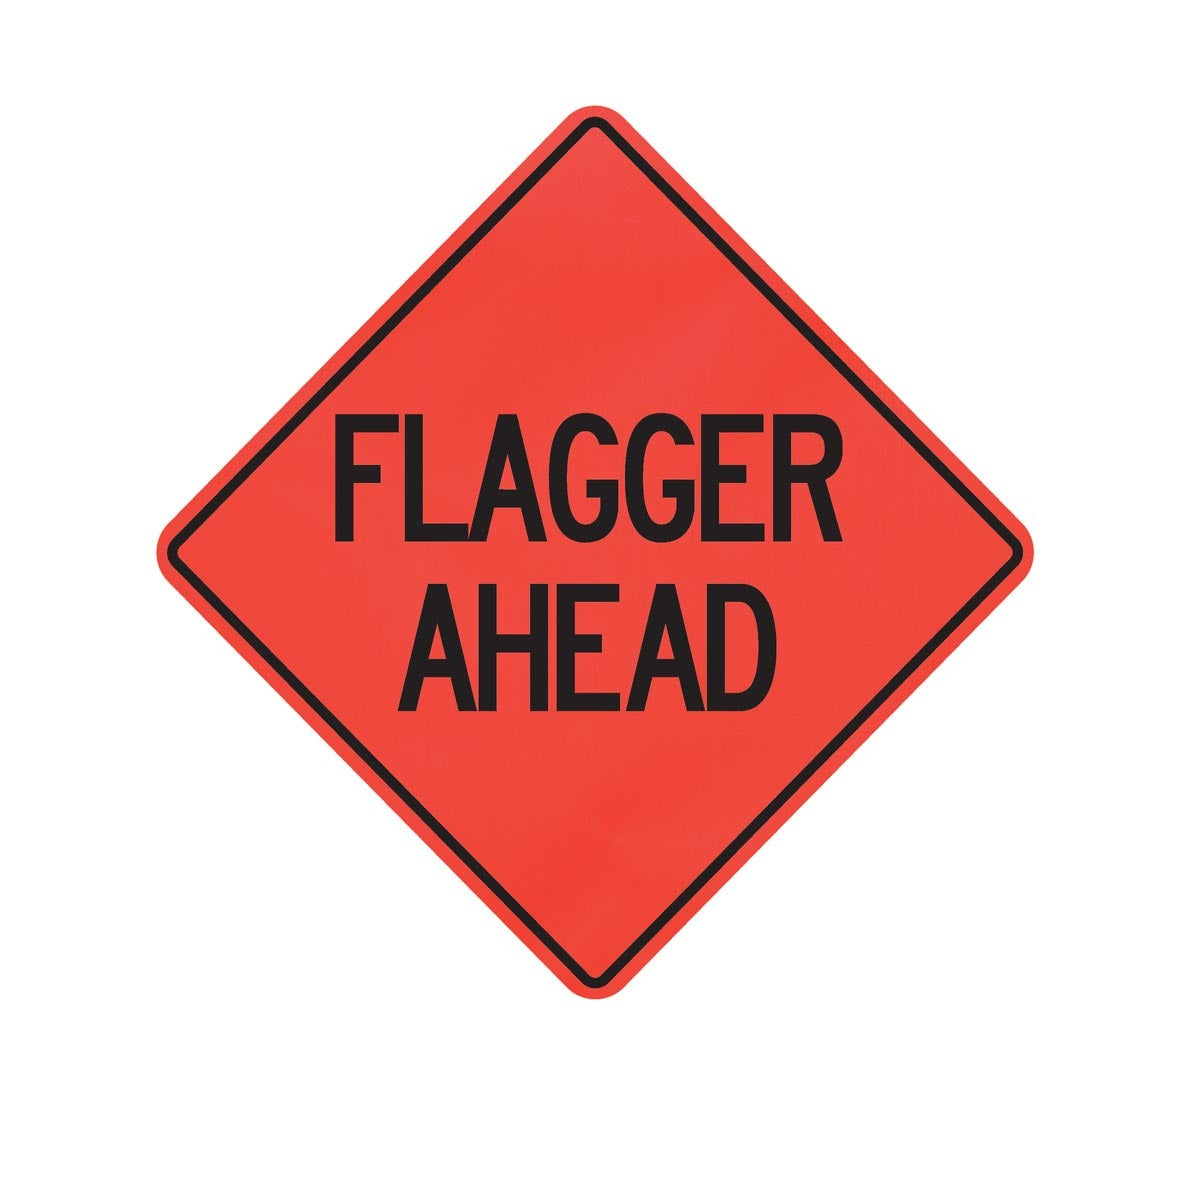 Cortina Safety Products 69" X 4" X 4" Orange And Black Lexan Polycarbonate Roll-Up Sign "FLAGGER AHEAD" - 48" Mesh (1 pack)